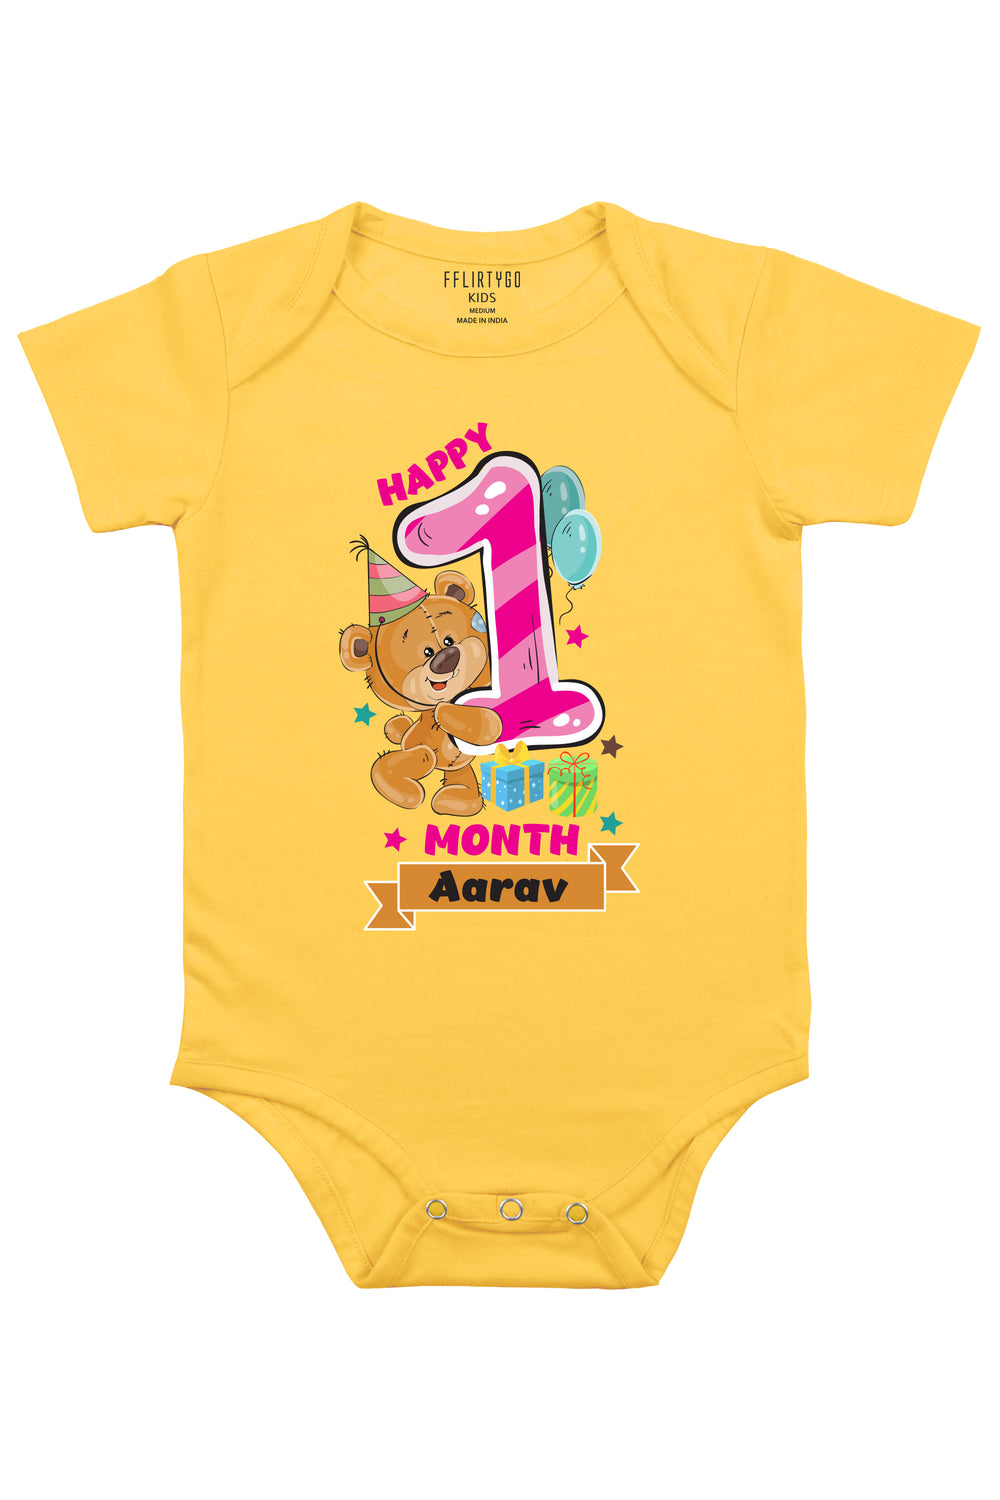 Adorable rompers for newborns now available at Fflirtygo. Explore yellow baby rompers, including a charming teddy bear onesie, for ultimate comfort and style.